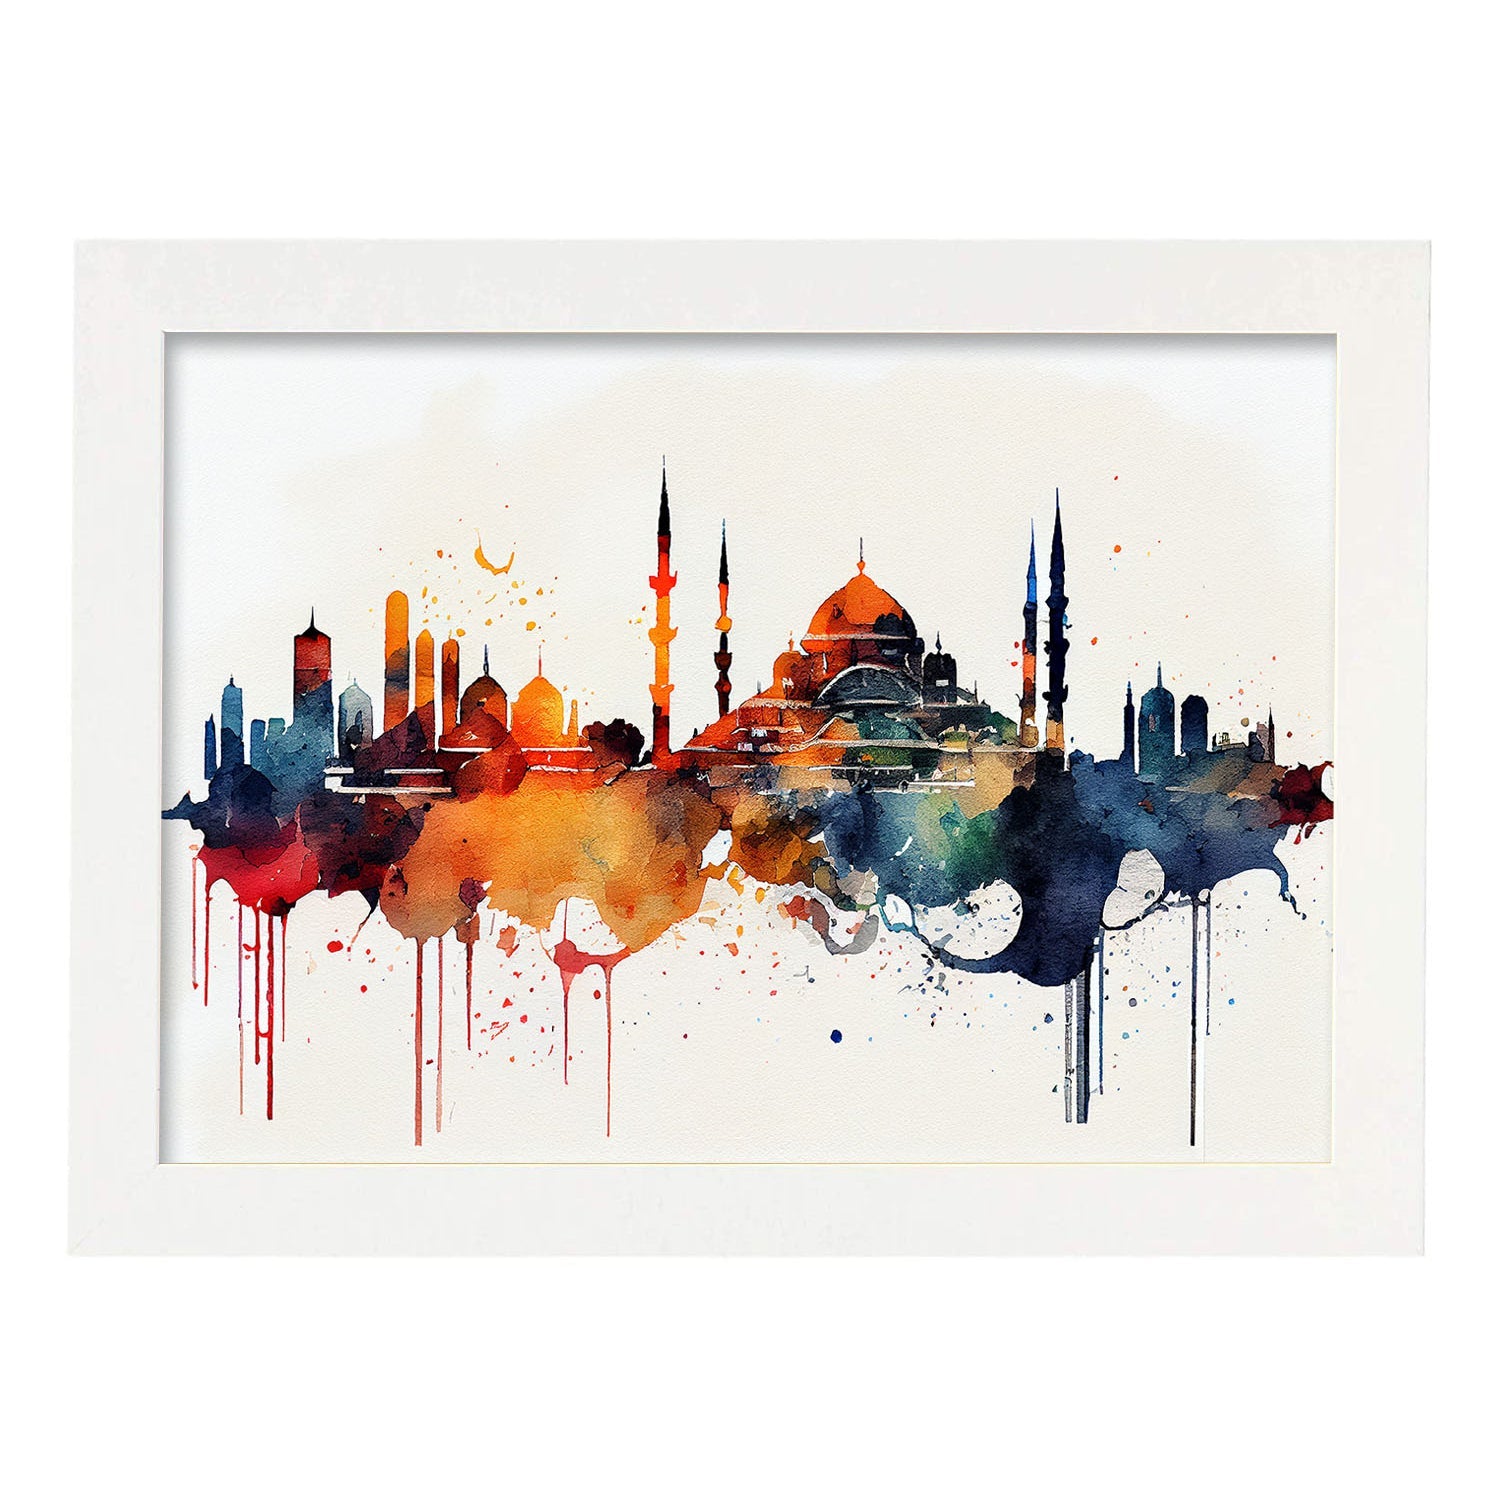 Nacnic watercolor of a skyline of the city of Istanbul_1. Aesthetic Wall Art Prints for Bedroom or Living Room Design.-Artwork-Nacnic-A4-Marco Blanco-Nacnic Estudio SL